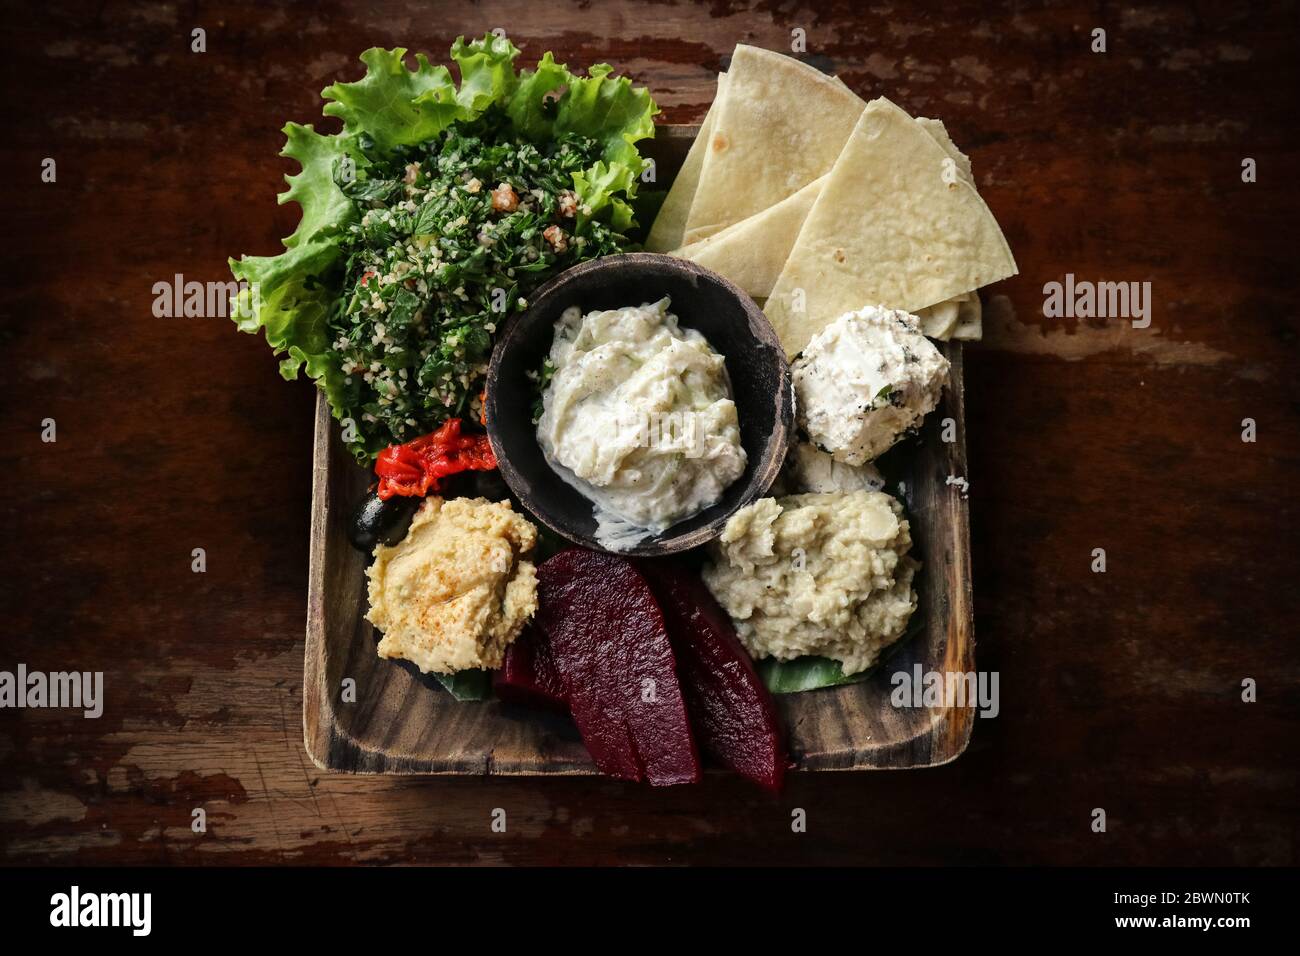 Mezze Platter with hummus, babaganoush, tabouli, roasted peppers, beet, feta cheese and kalamata olives served with pita bread on wooden background, t Stock Photo